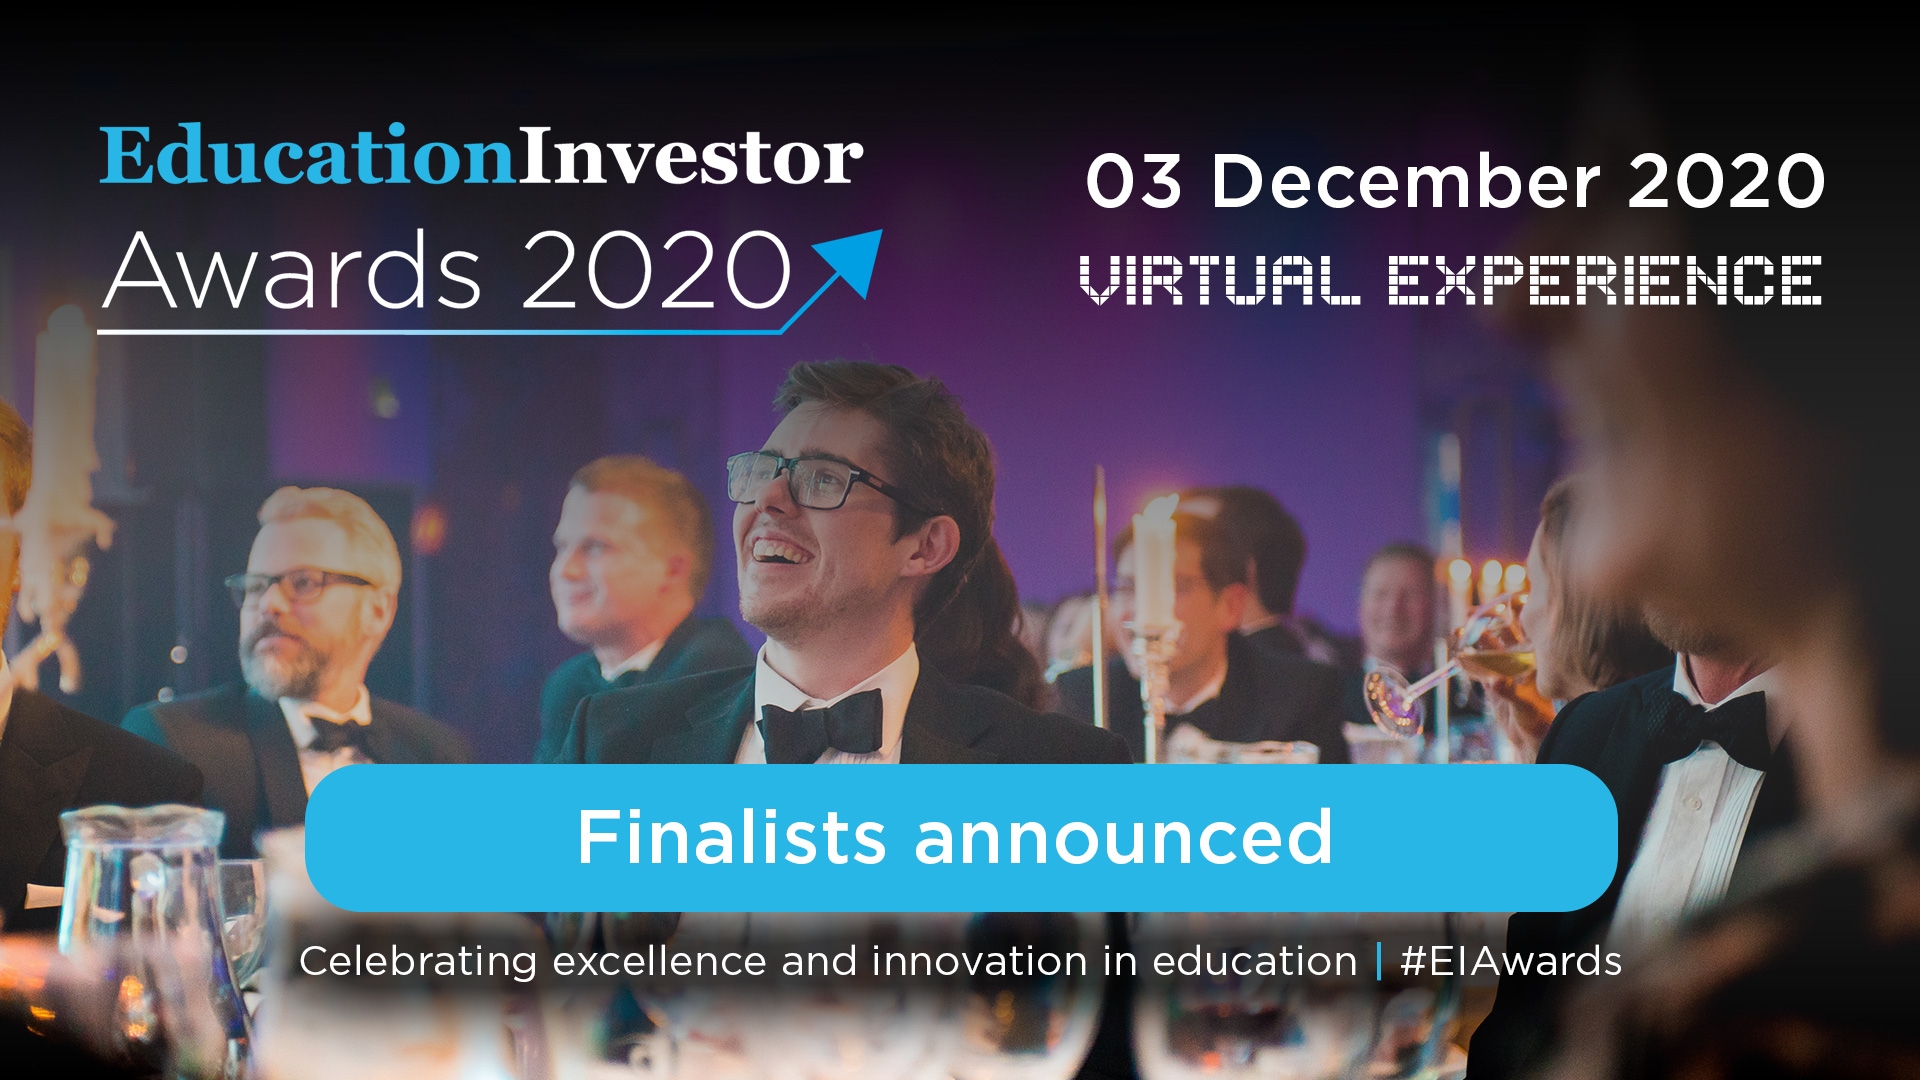 CEG Digital announced as finalist for Education business of the year